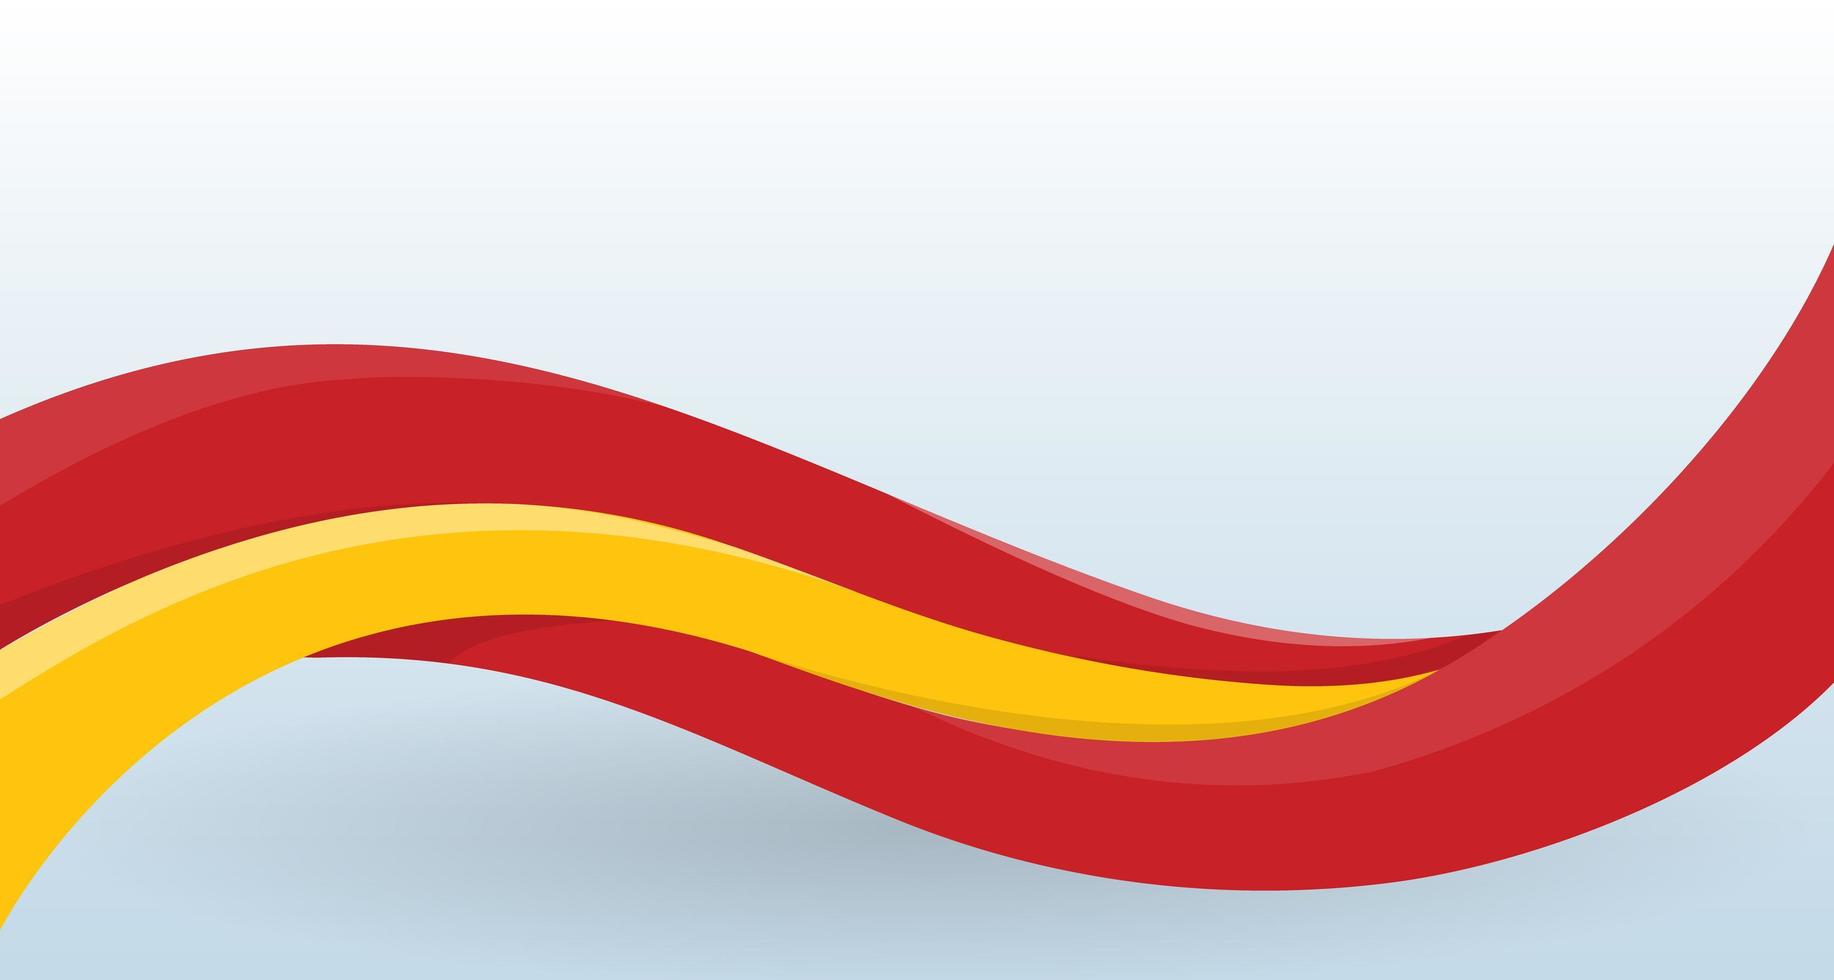 Spain National flag. Waving unusual shape. Design template for decoration of flyer and card, poster, banner and logo. Isolated vector illustration.